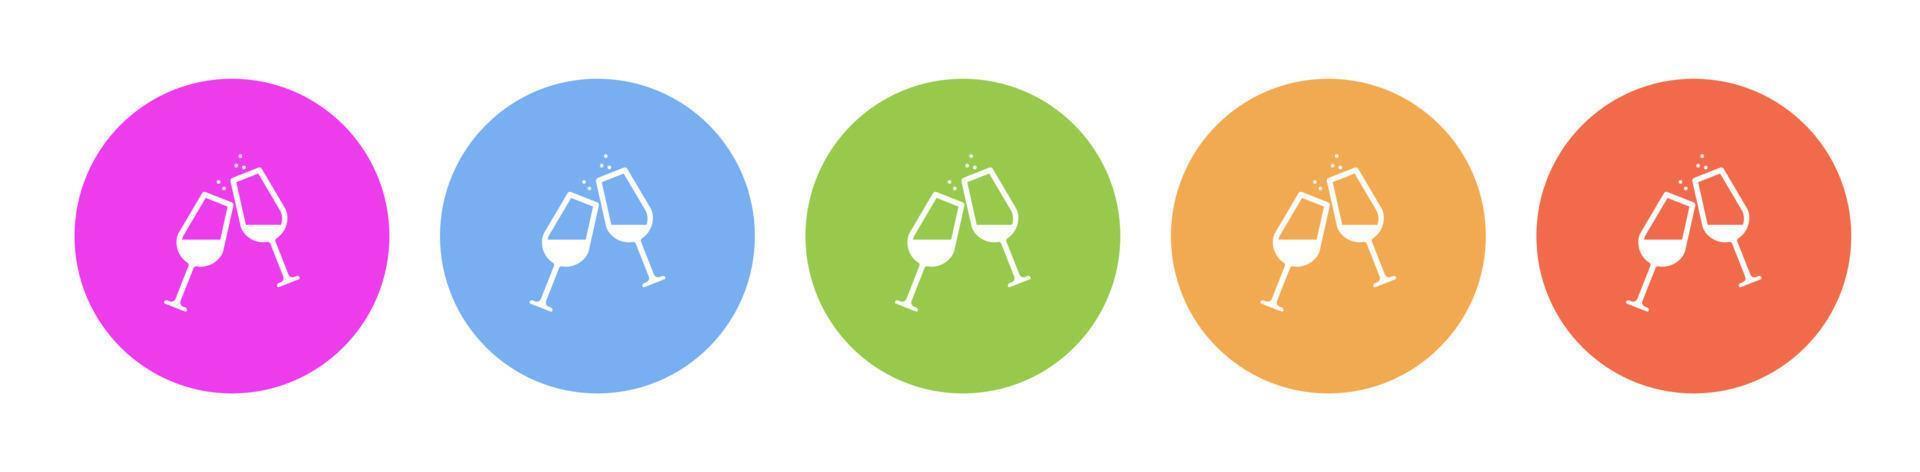 Multi colored flat icons on round backgrounds. champagne, couple, glass multicolor circle vector icon on white background